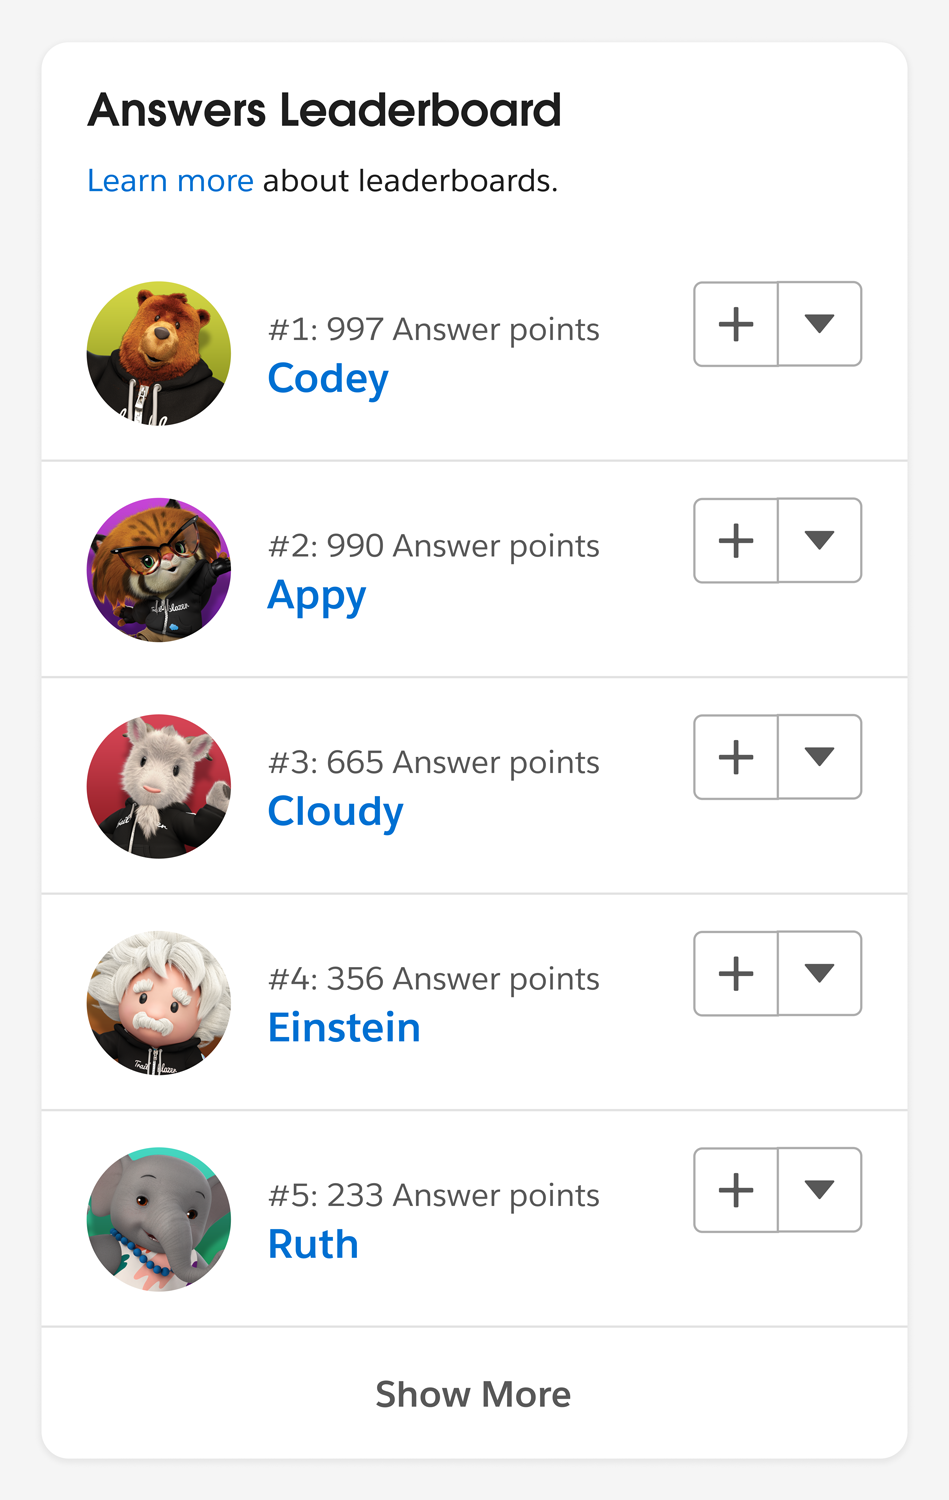 Answers Leaderboard listing who has helpfully answered questions in the Trailblazer Community.